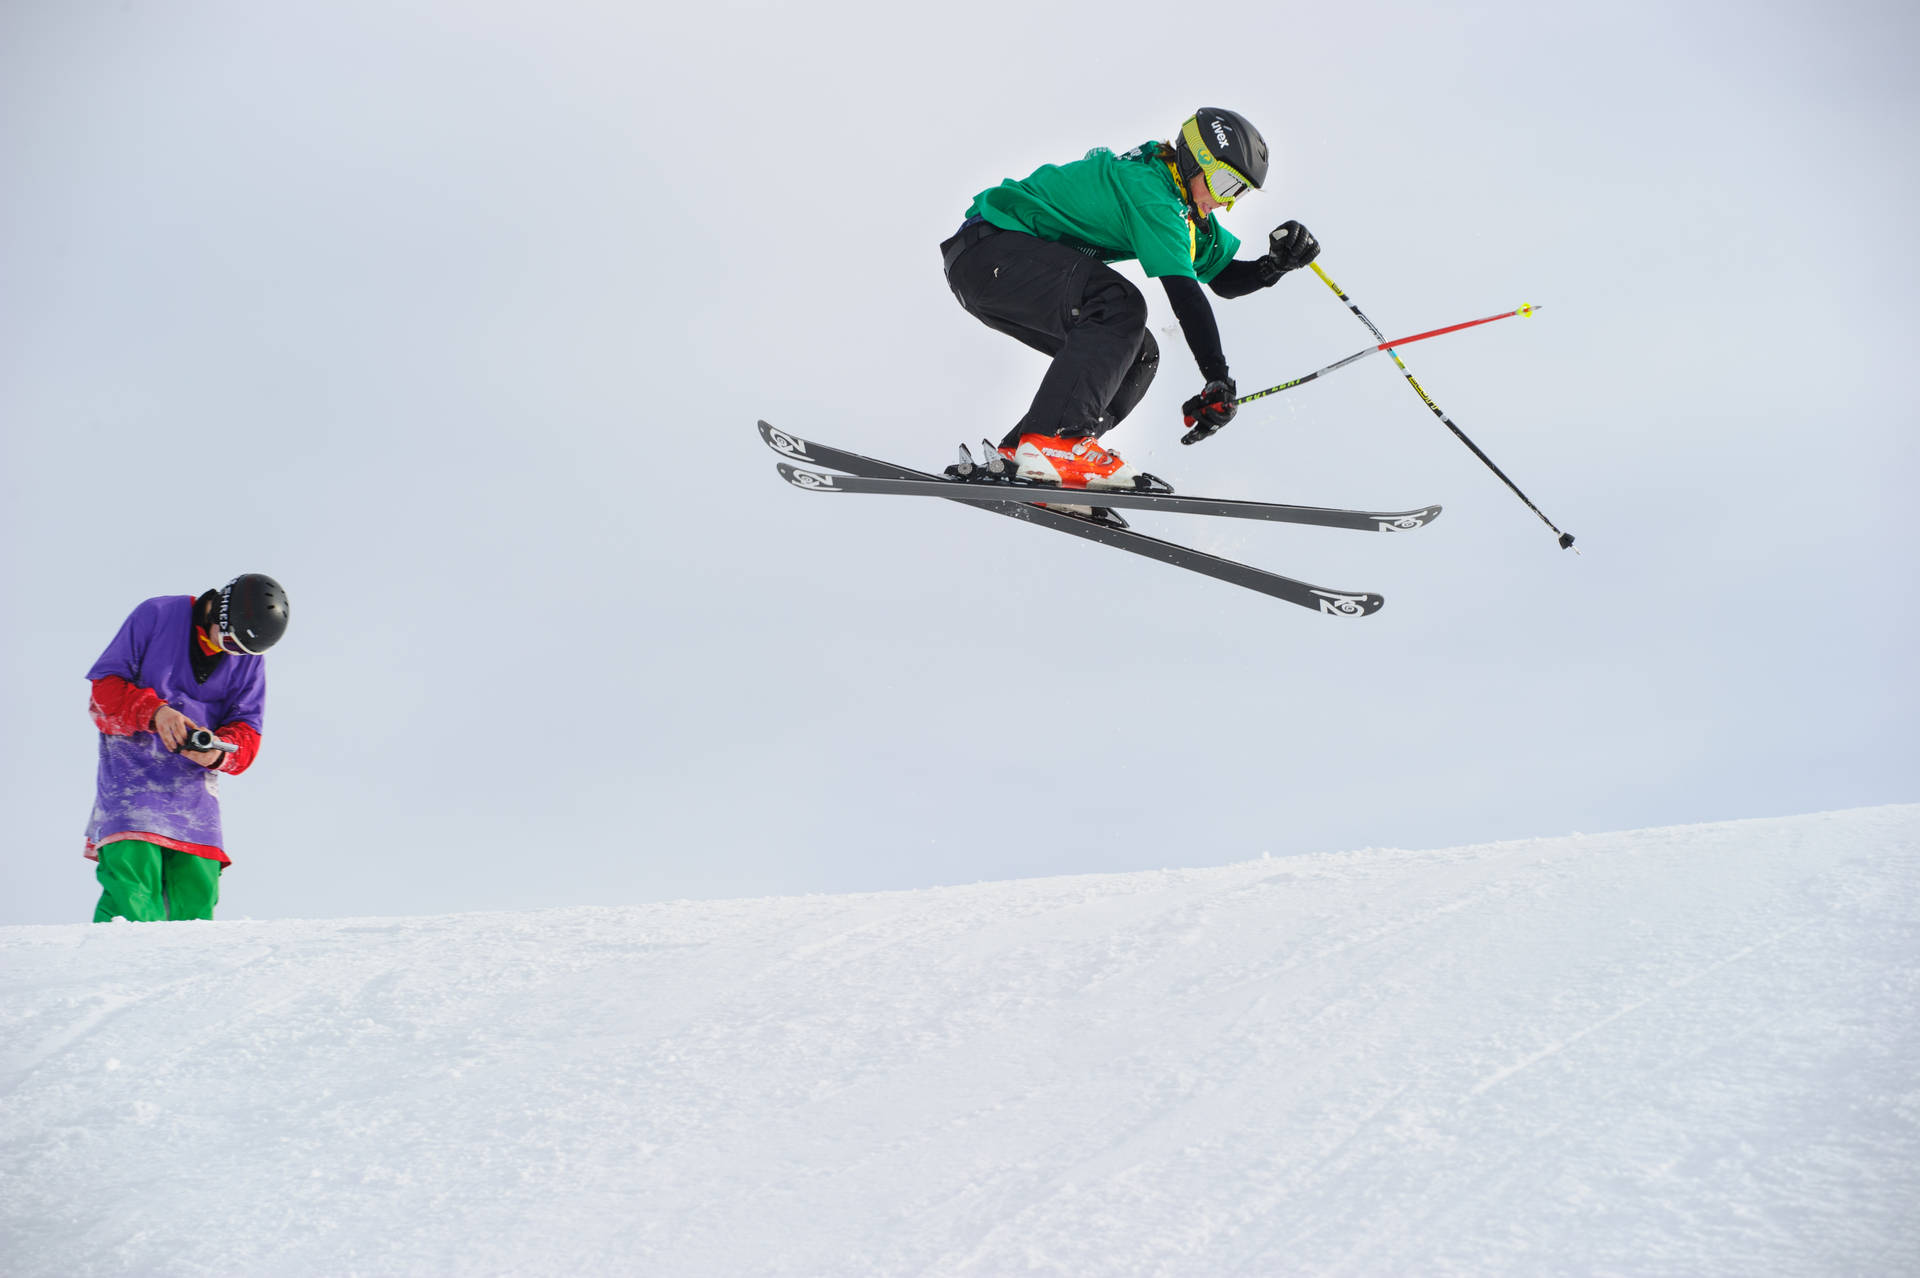 Freestyle Skiing In Snow